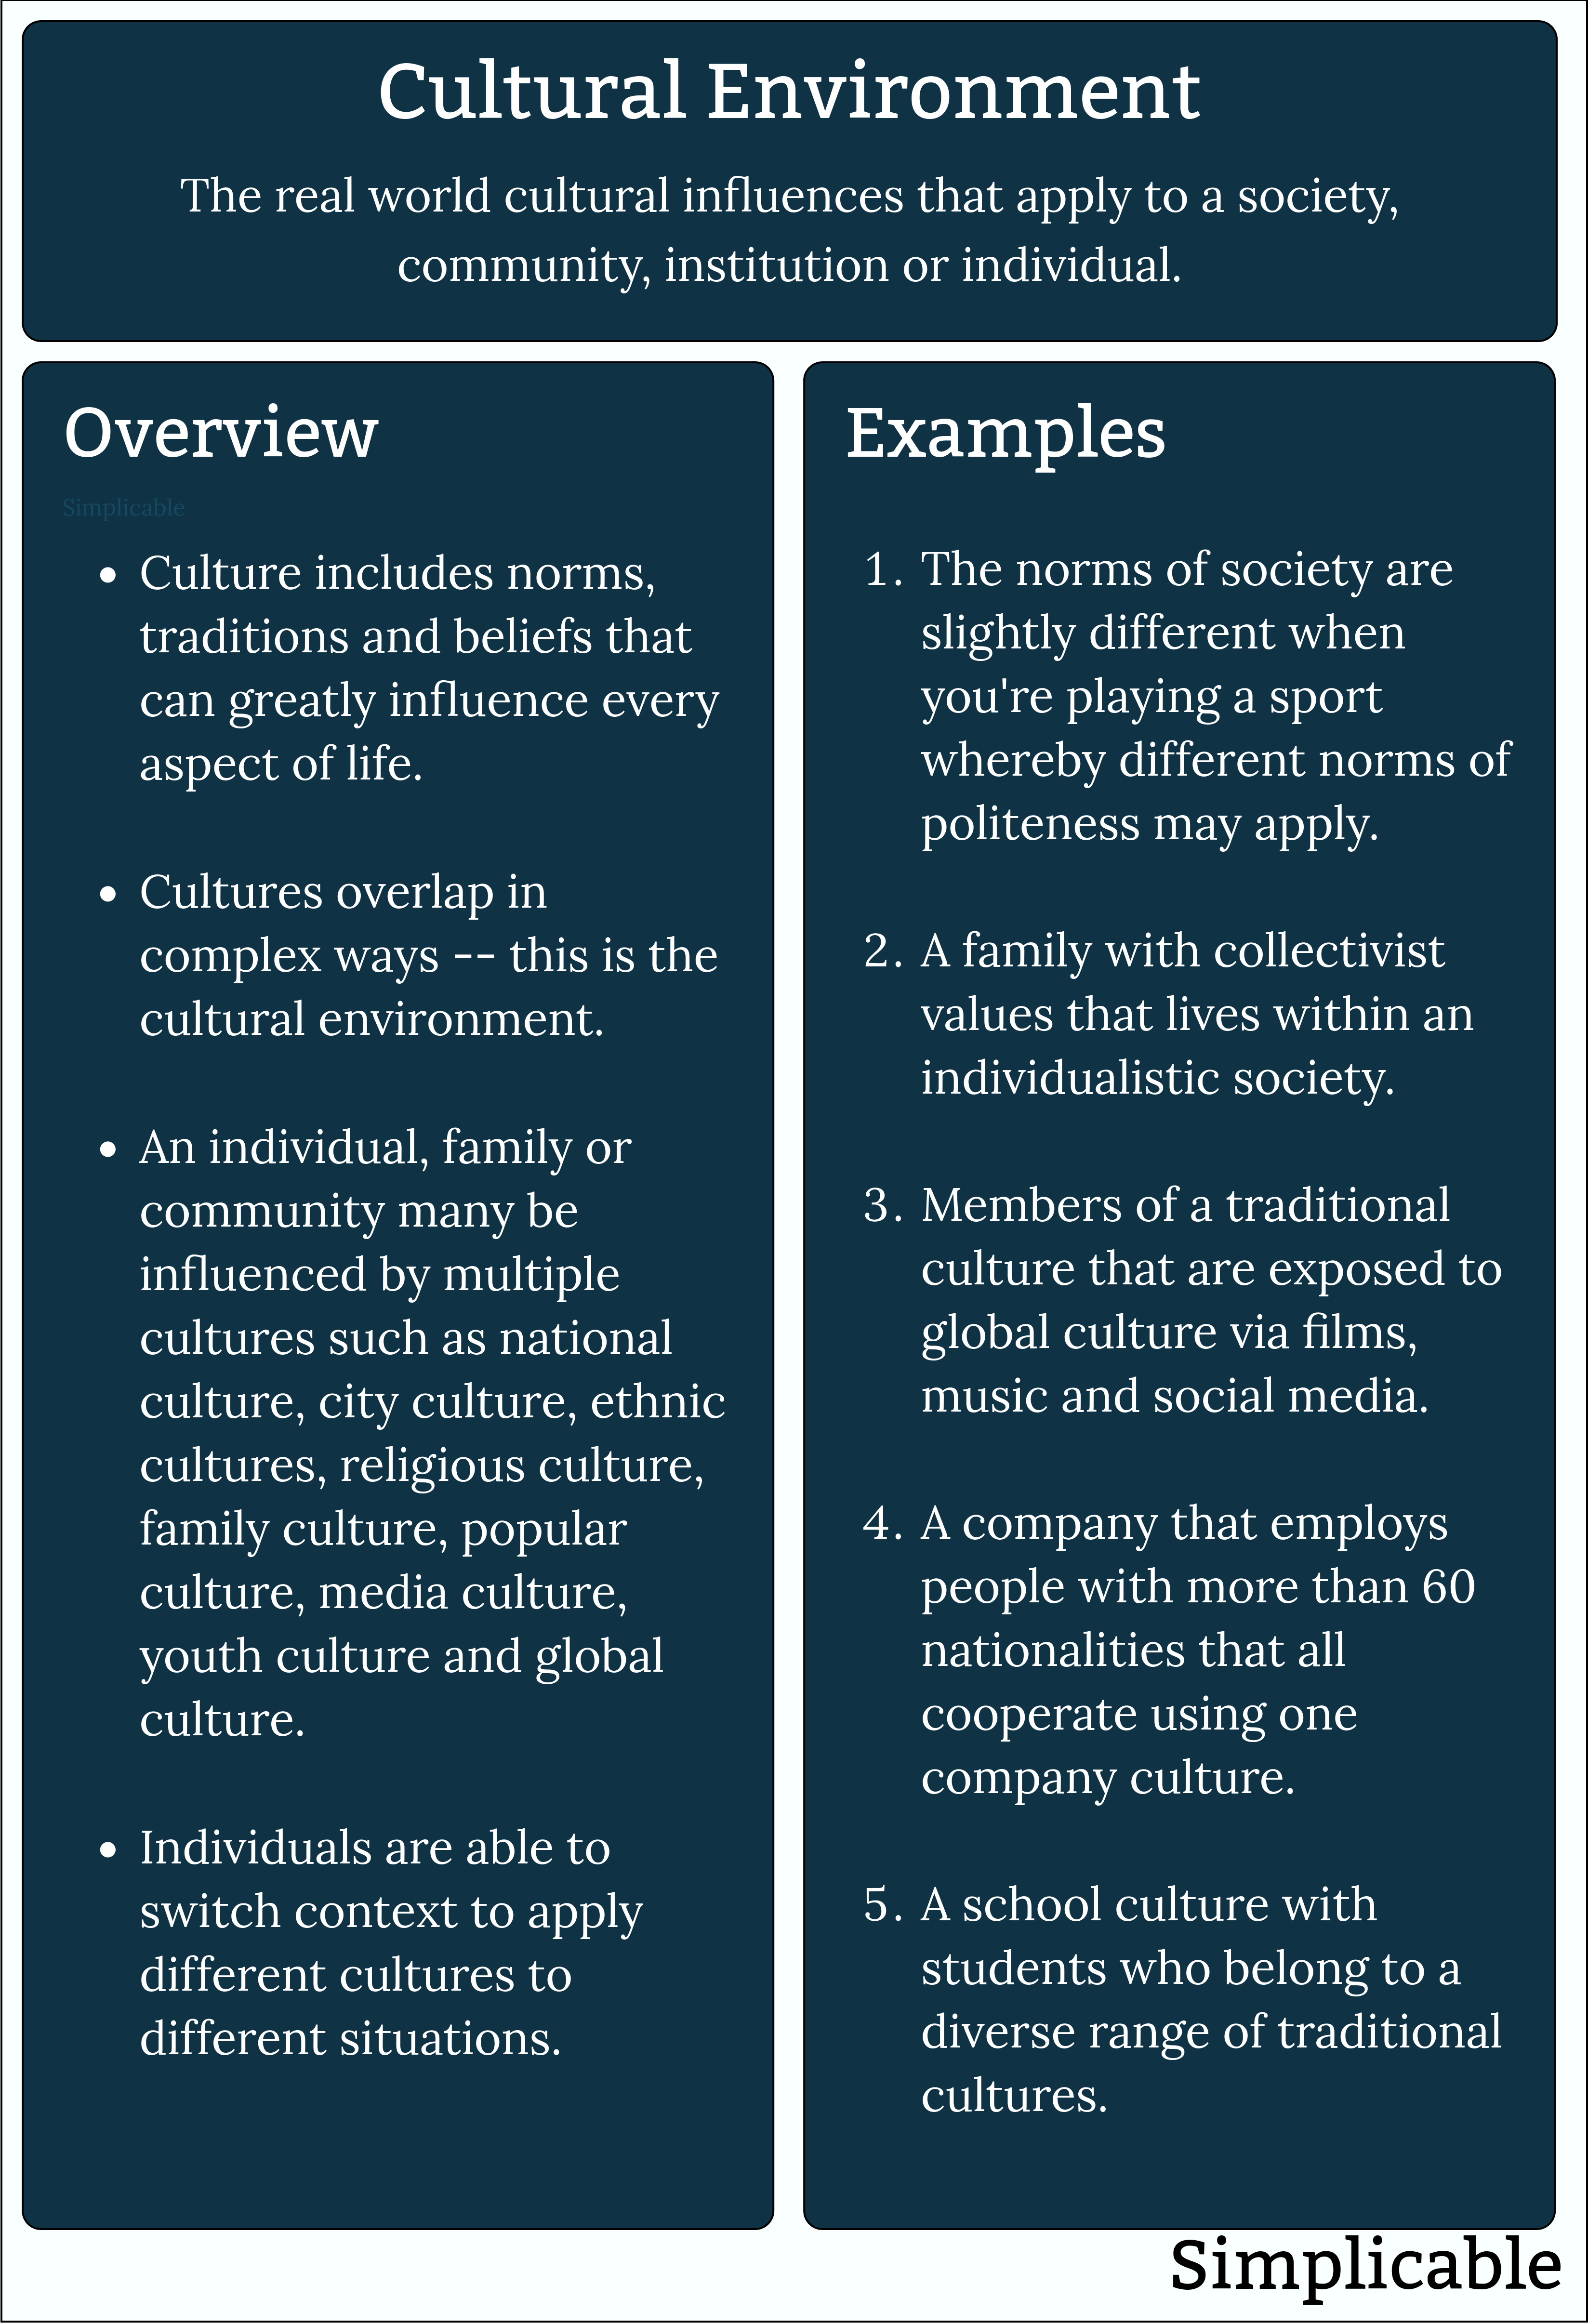 cultural environment overview and examples